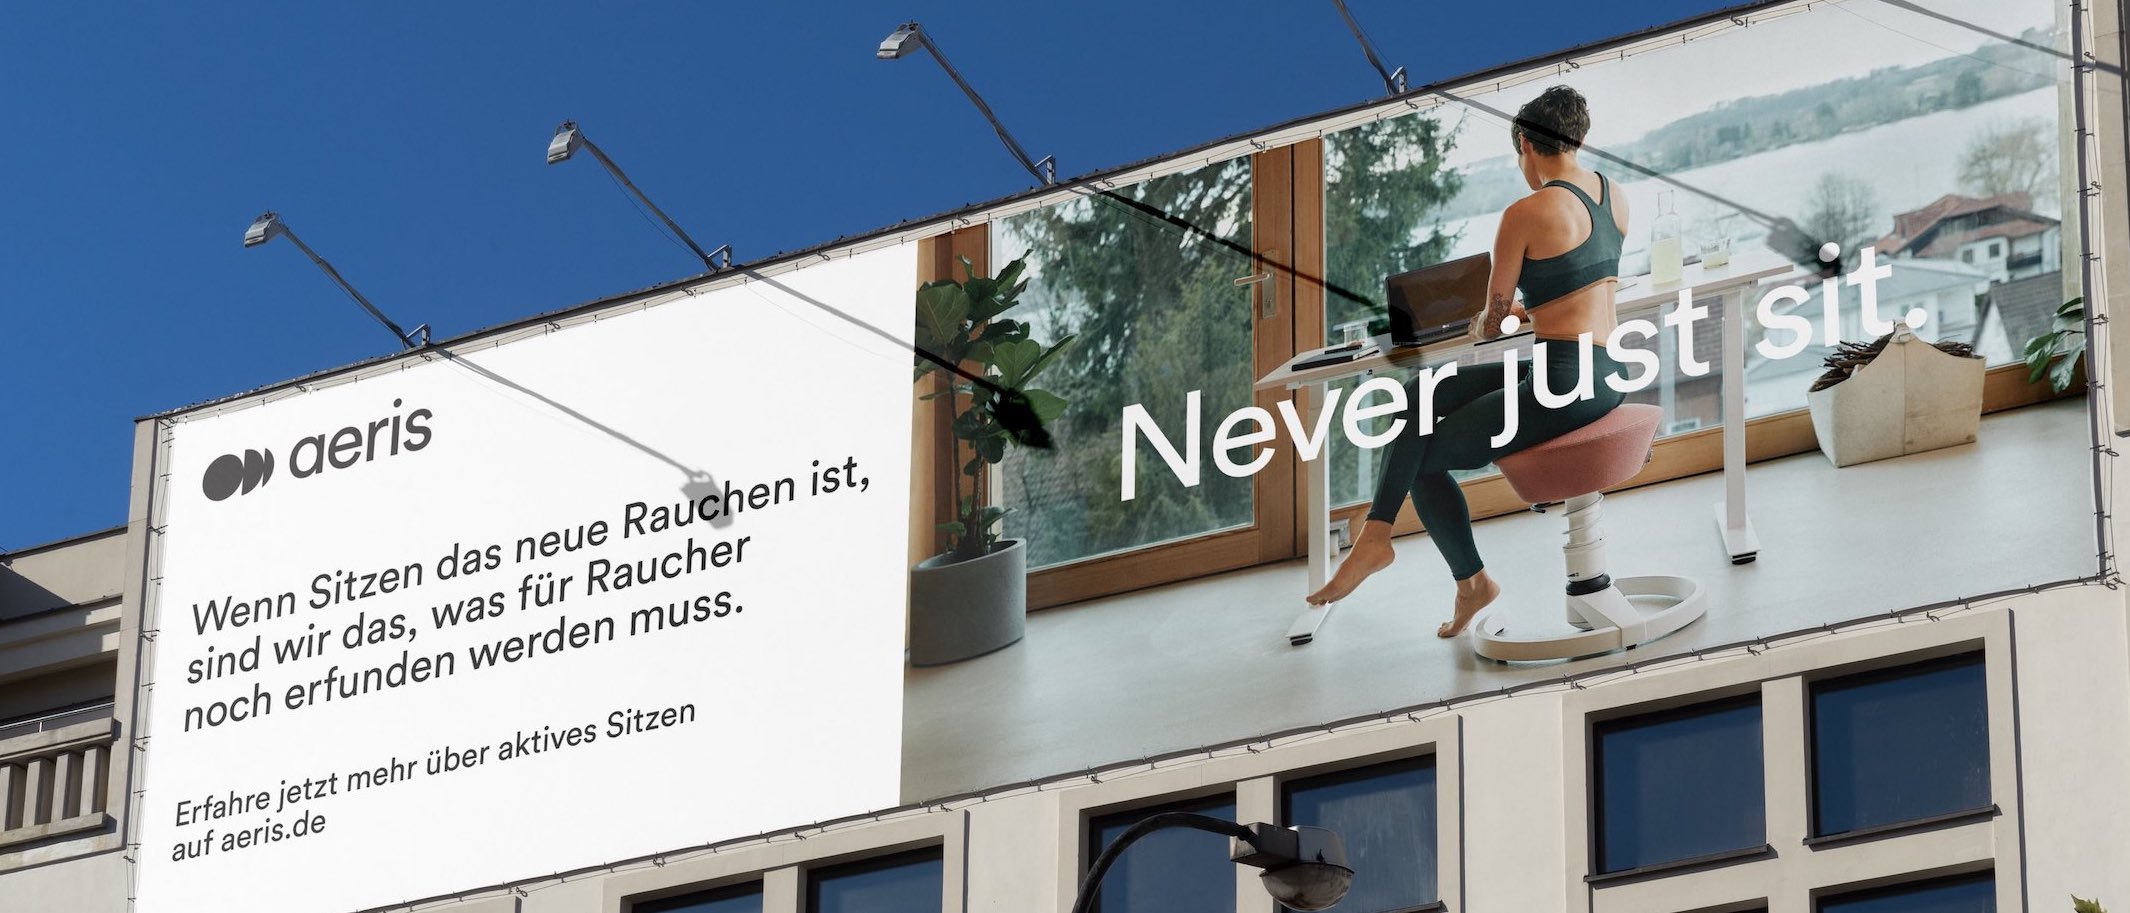 Aeris Brand Kampagne 2022. Grosses Out of Home Plakat an Gebäude.